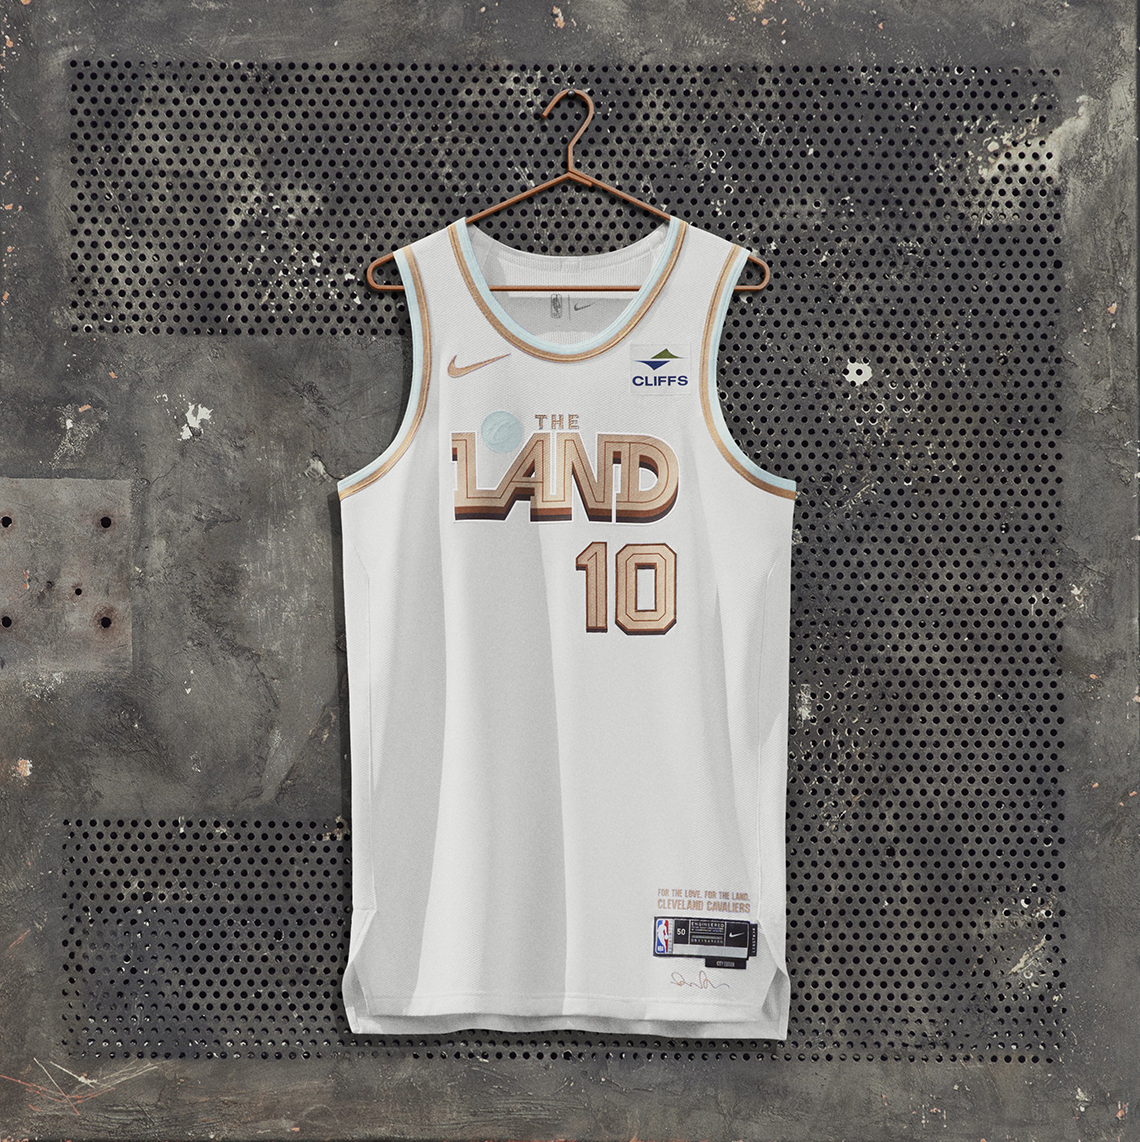 J23 iPhone App on X: Nike x NBA “City Edition” Jerseys unveiled Details  ->   / X